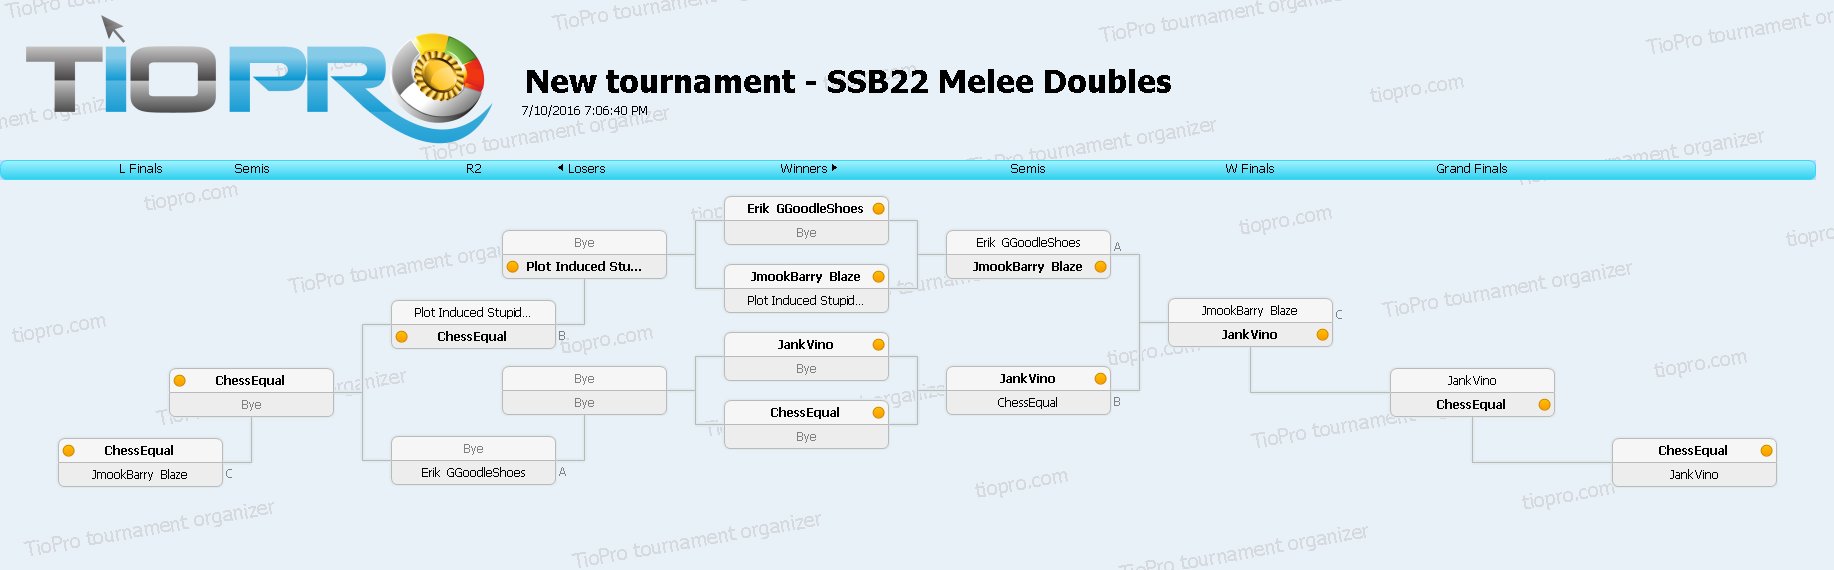 SSB22 Melee Doubles